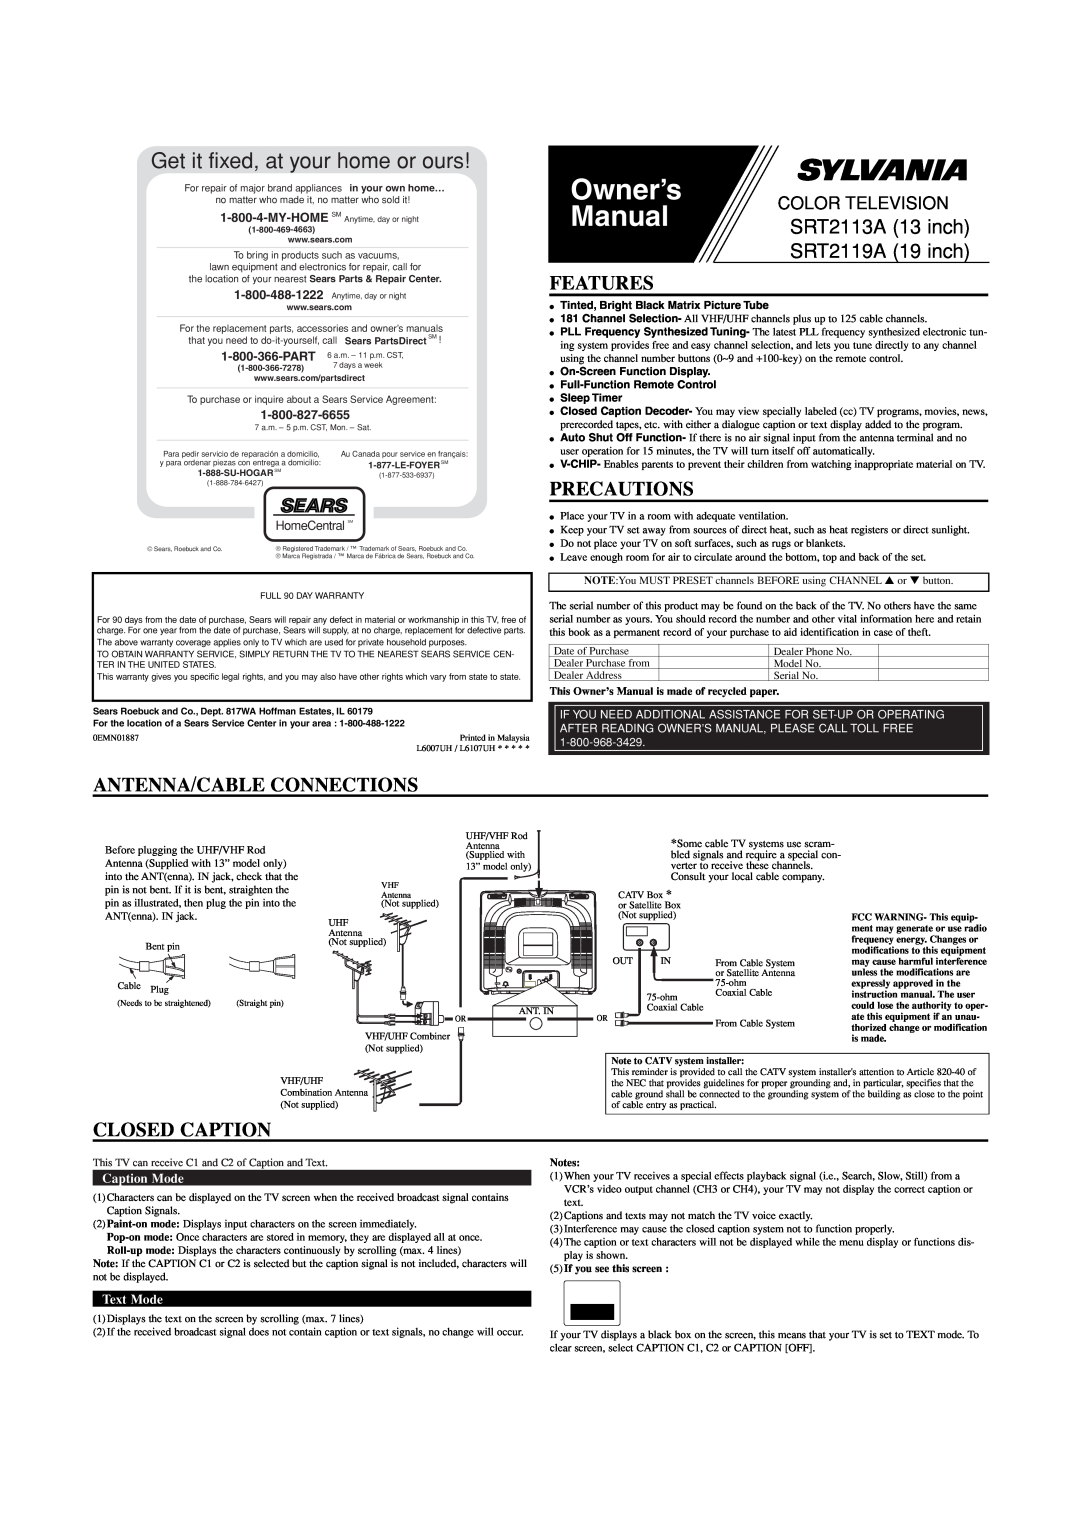 Sylvania SRT2113A owner manual Features, Precautions, Antenna/Cable Connections, Closed Caption, Caption Mode, Text Mode 